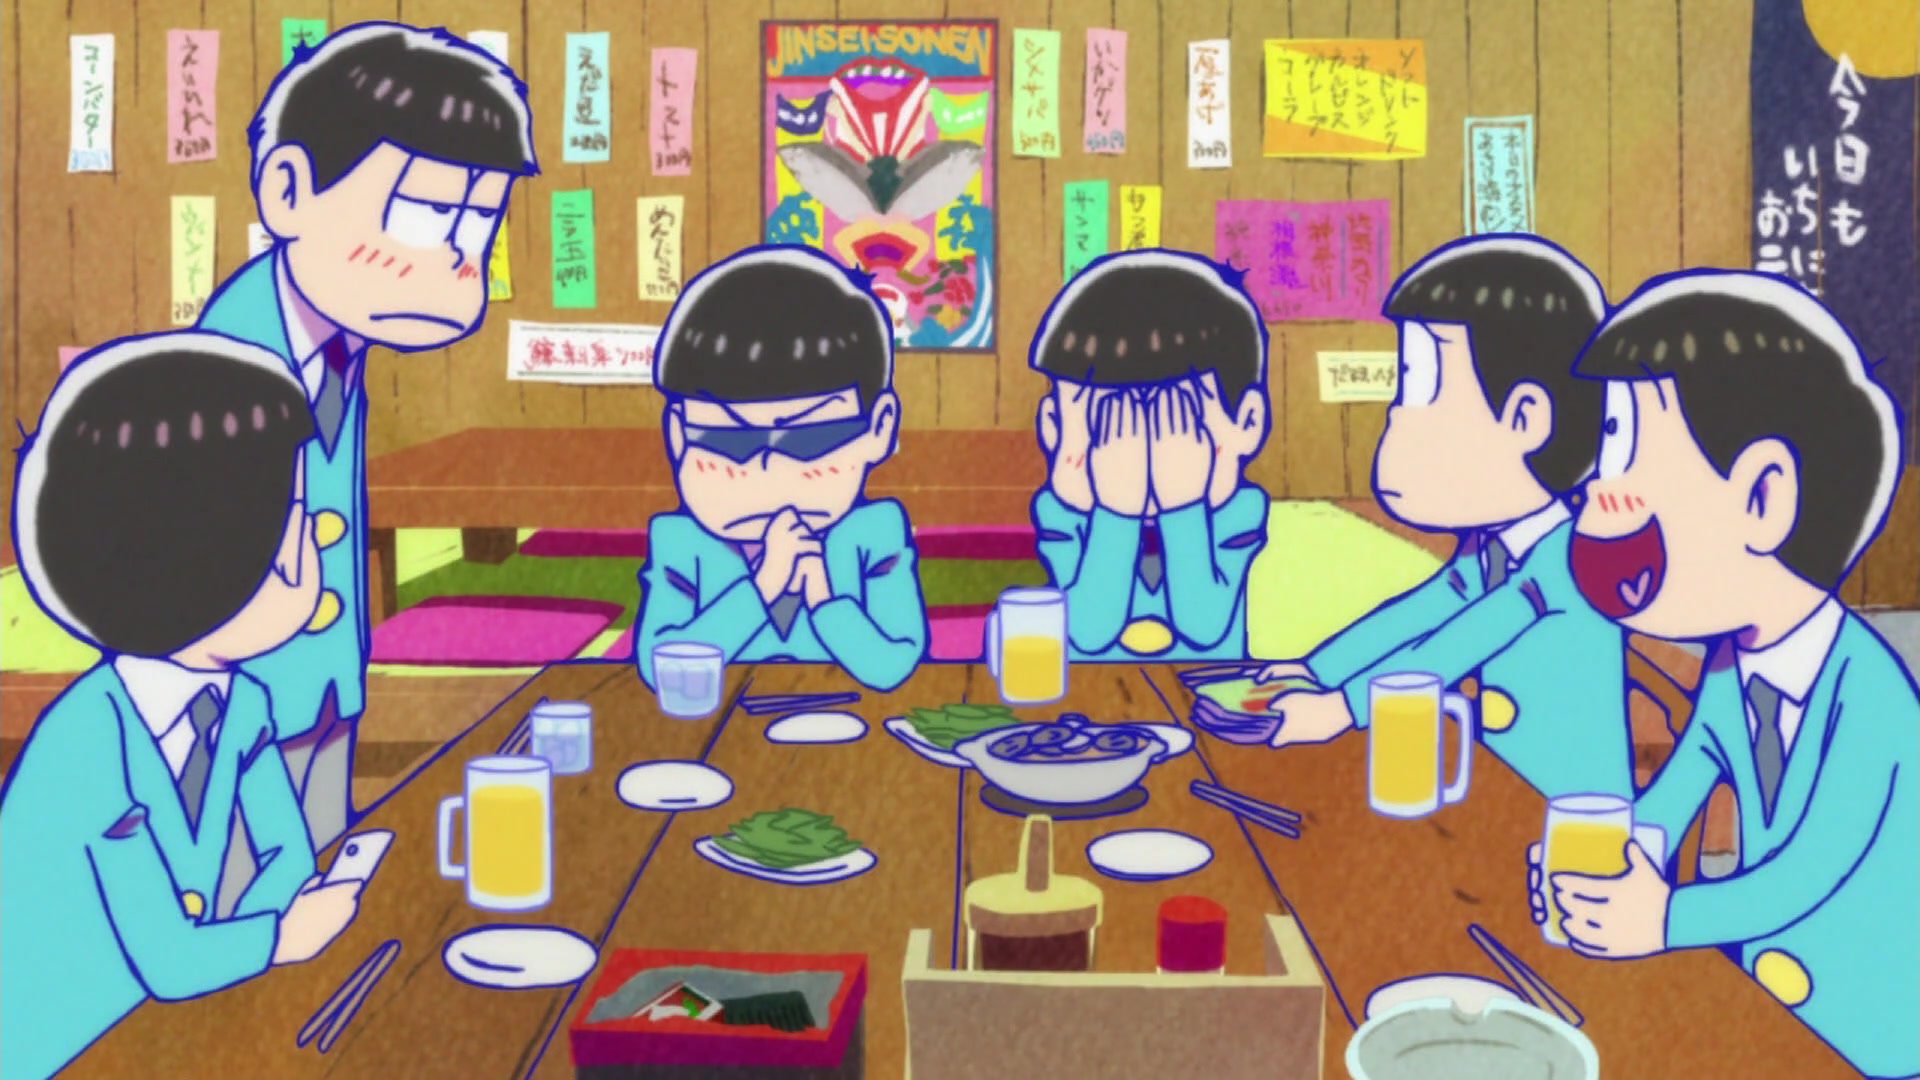 The Matsuno Sextuplets conisider their futures in Mr. Osomatsu Episode 2 "Let's Get a Job" (2015), Pierrot.